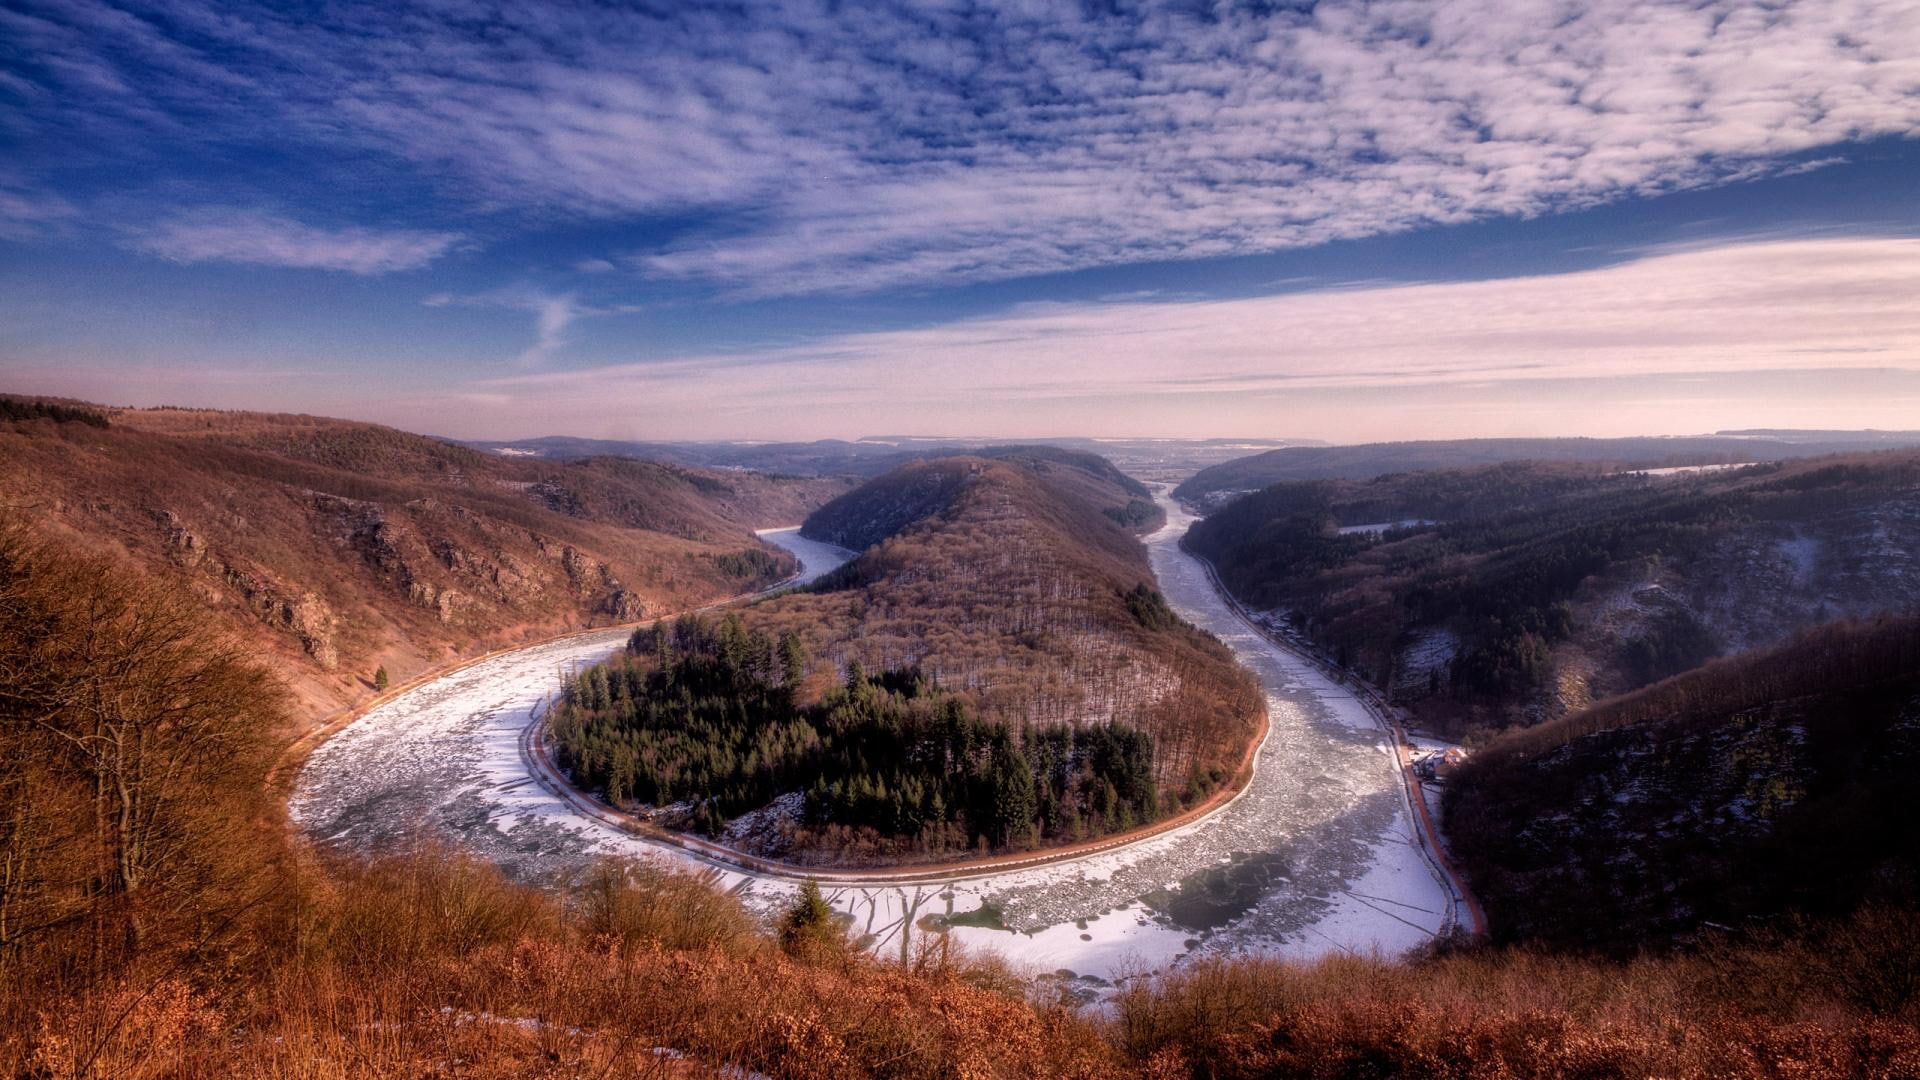 The River Saar In France, gorge, frozen, horseshoe, clouds, nature and landscapes